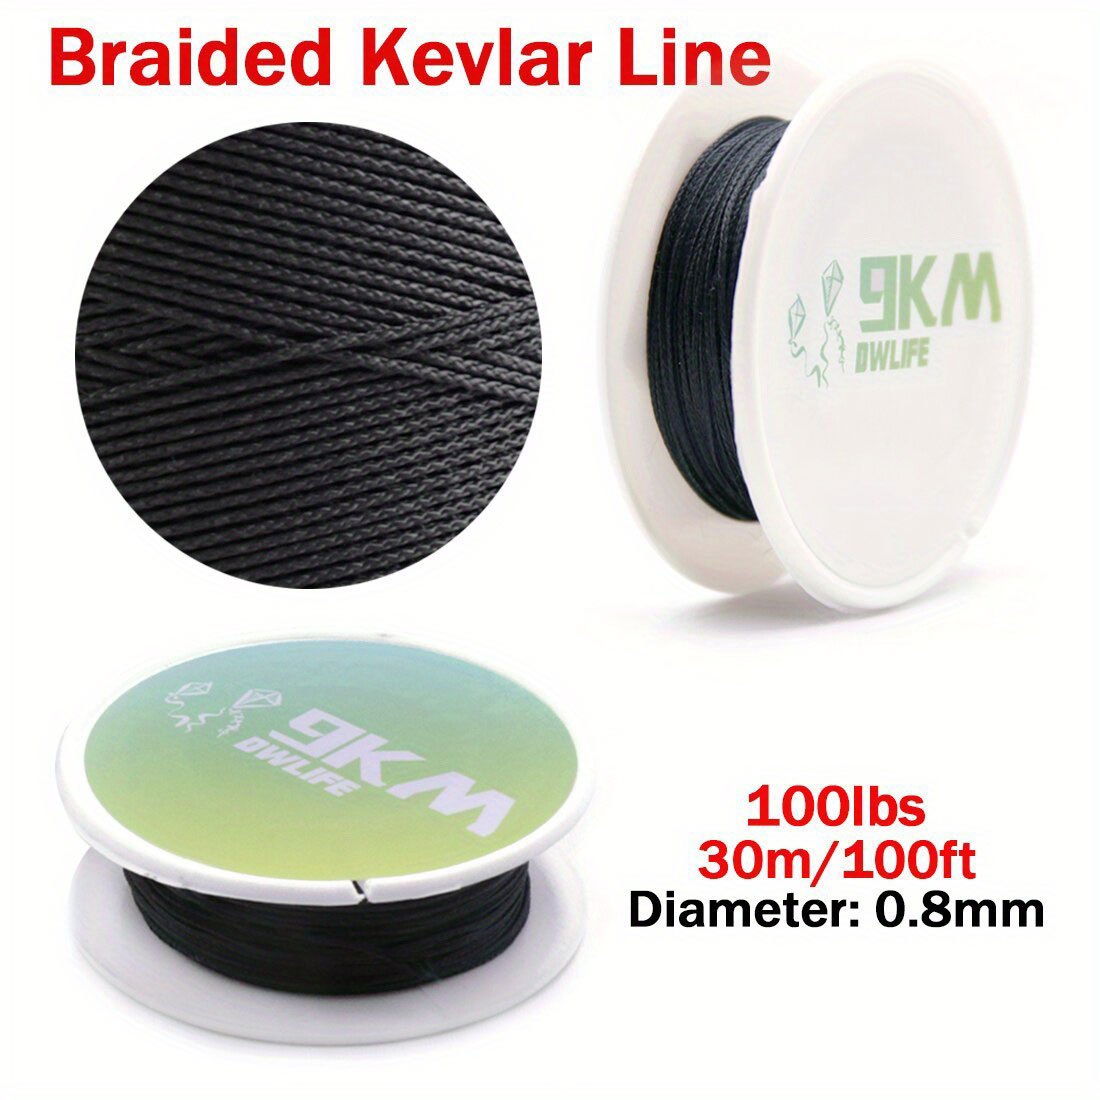 Braided Kevlar Cord 50lb~1500lbs High Strength Fishing Line Made with Kevlar